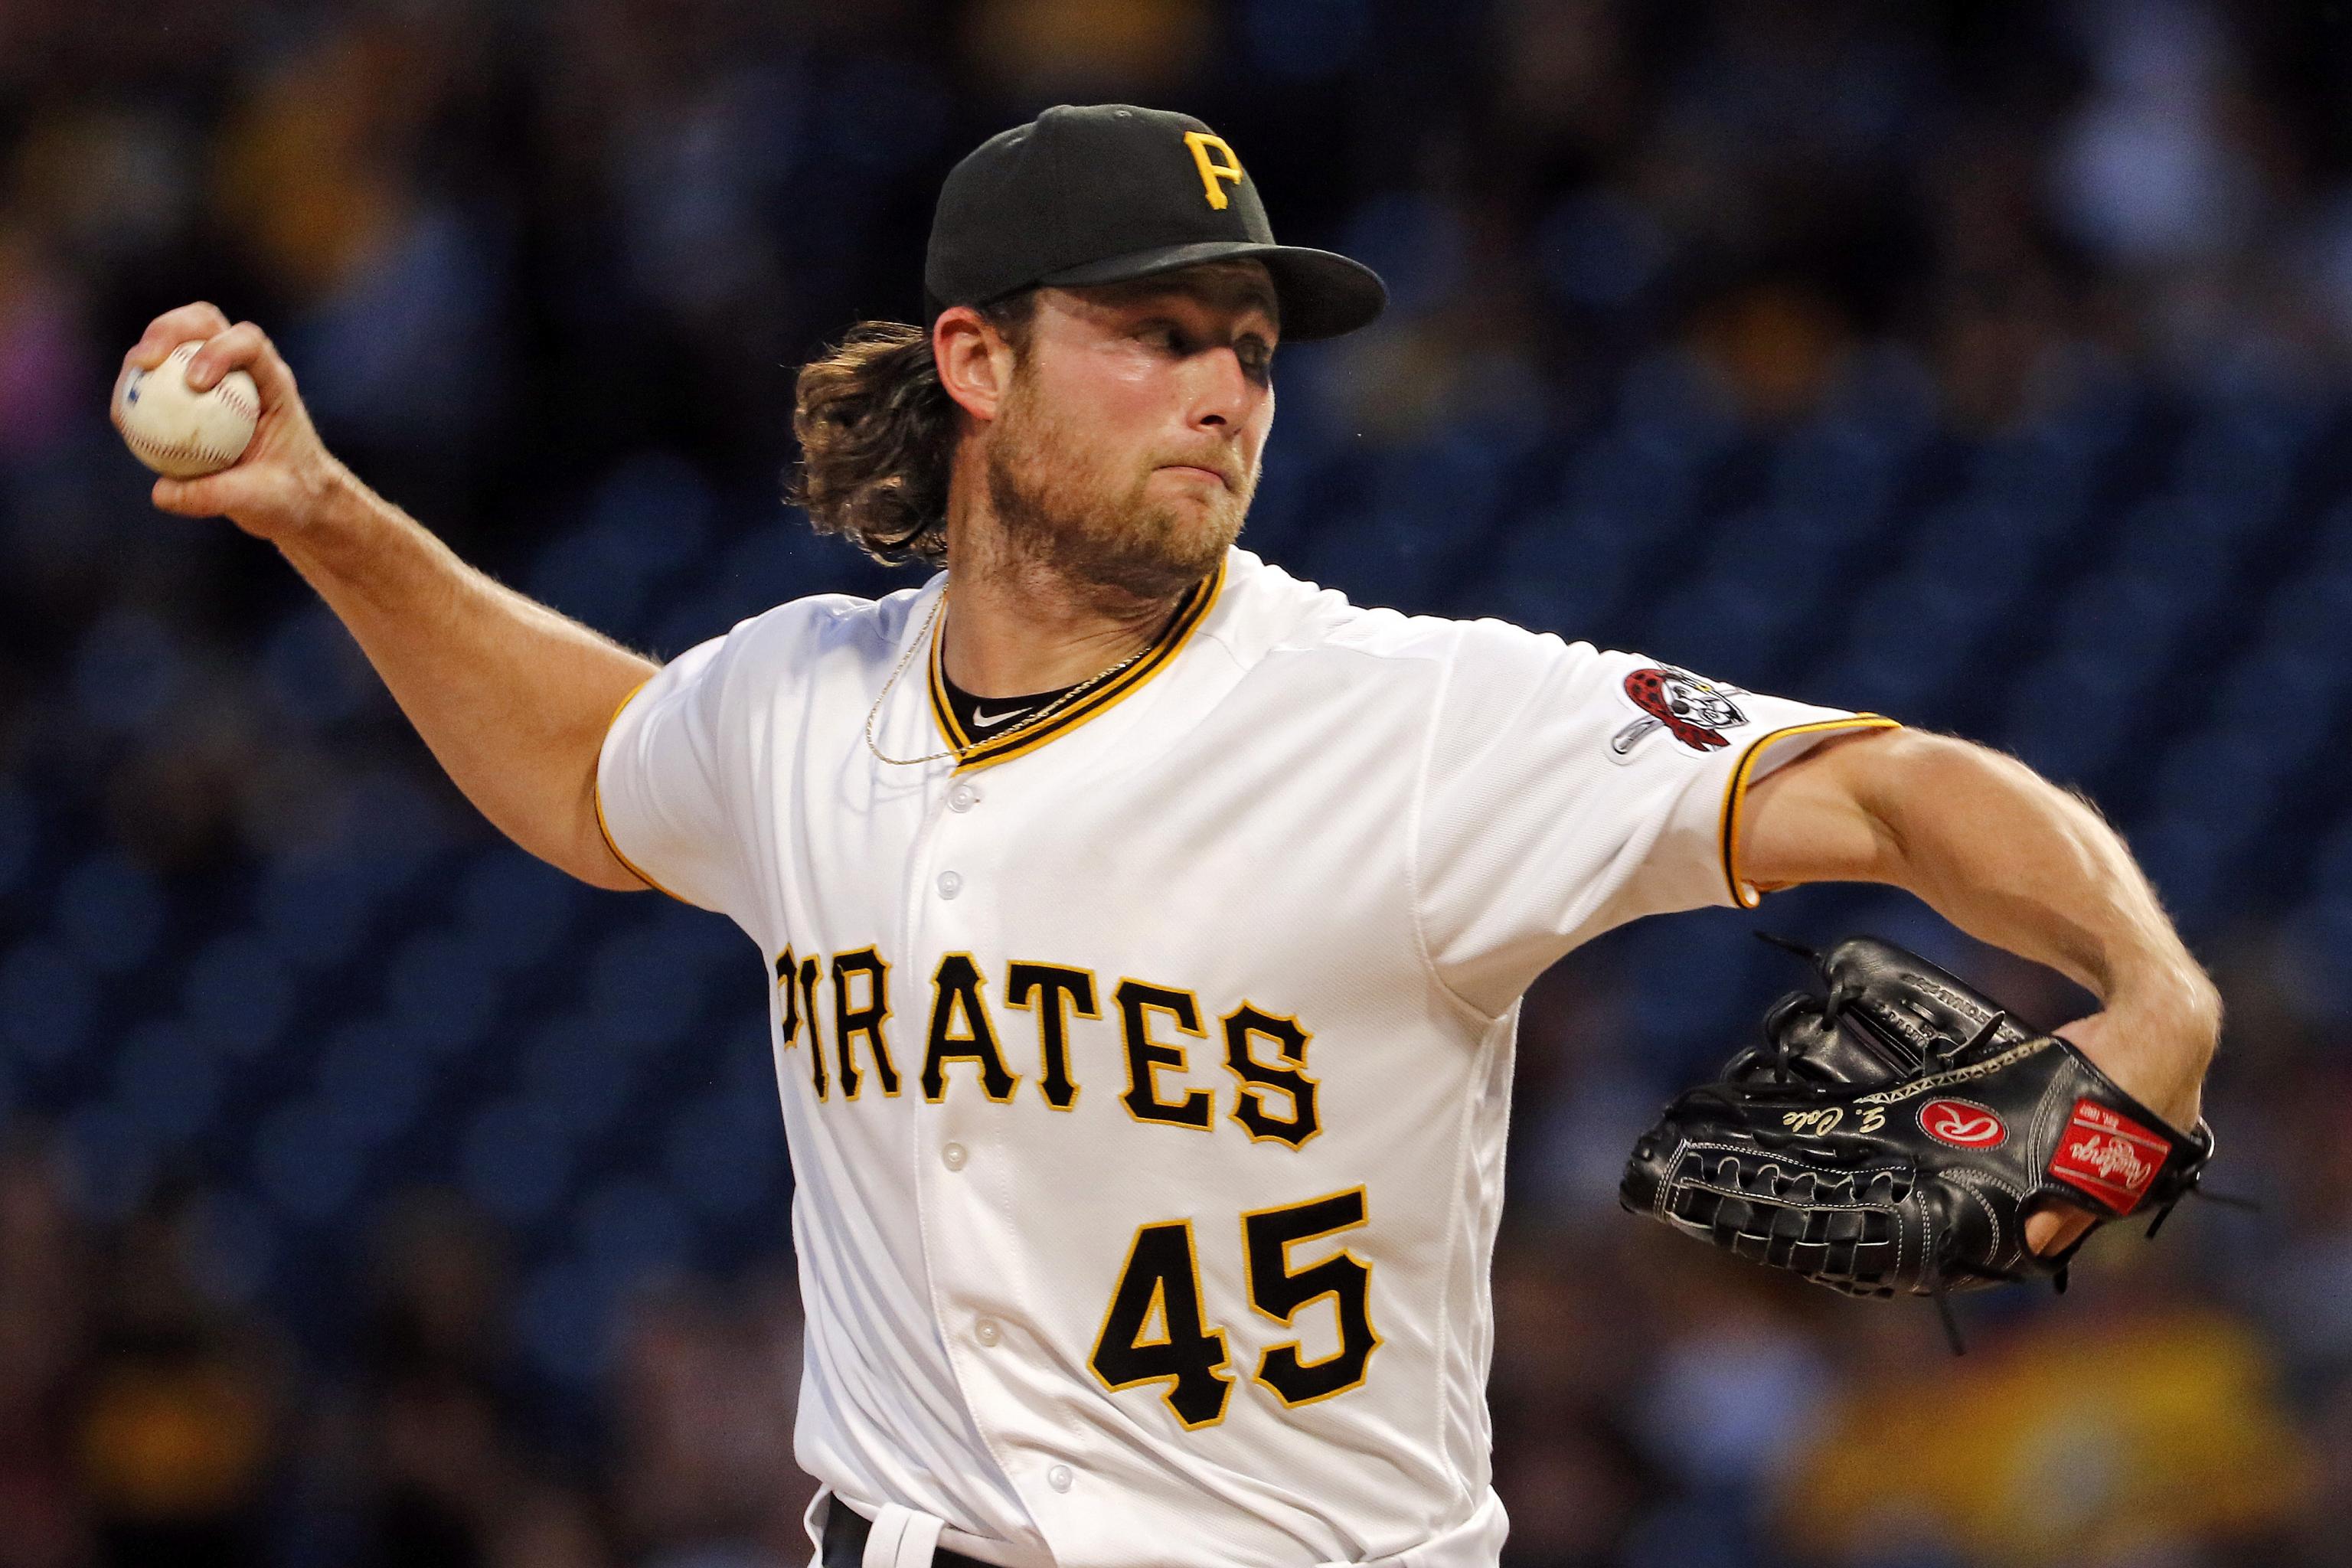 Pittsburgh Pirates starting pitcher Gerrit Cole stands in the